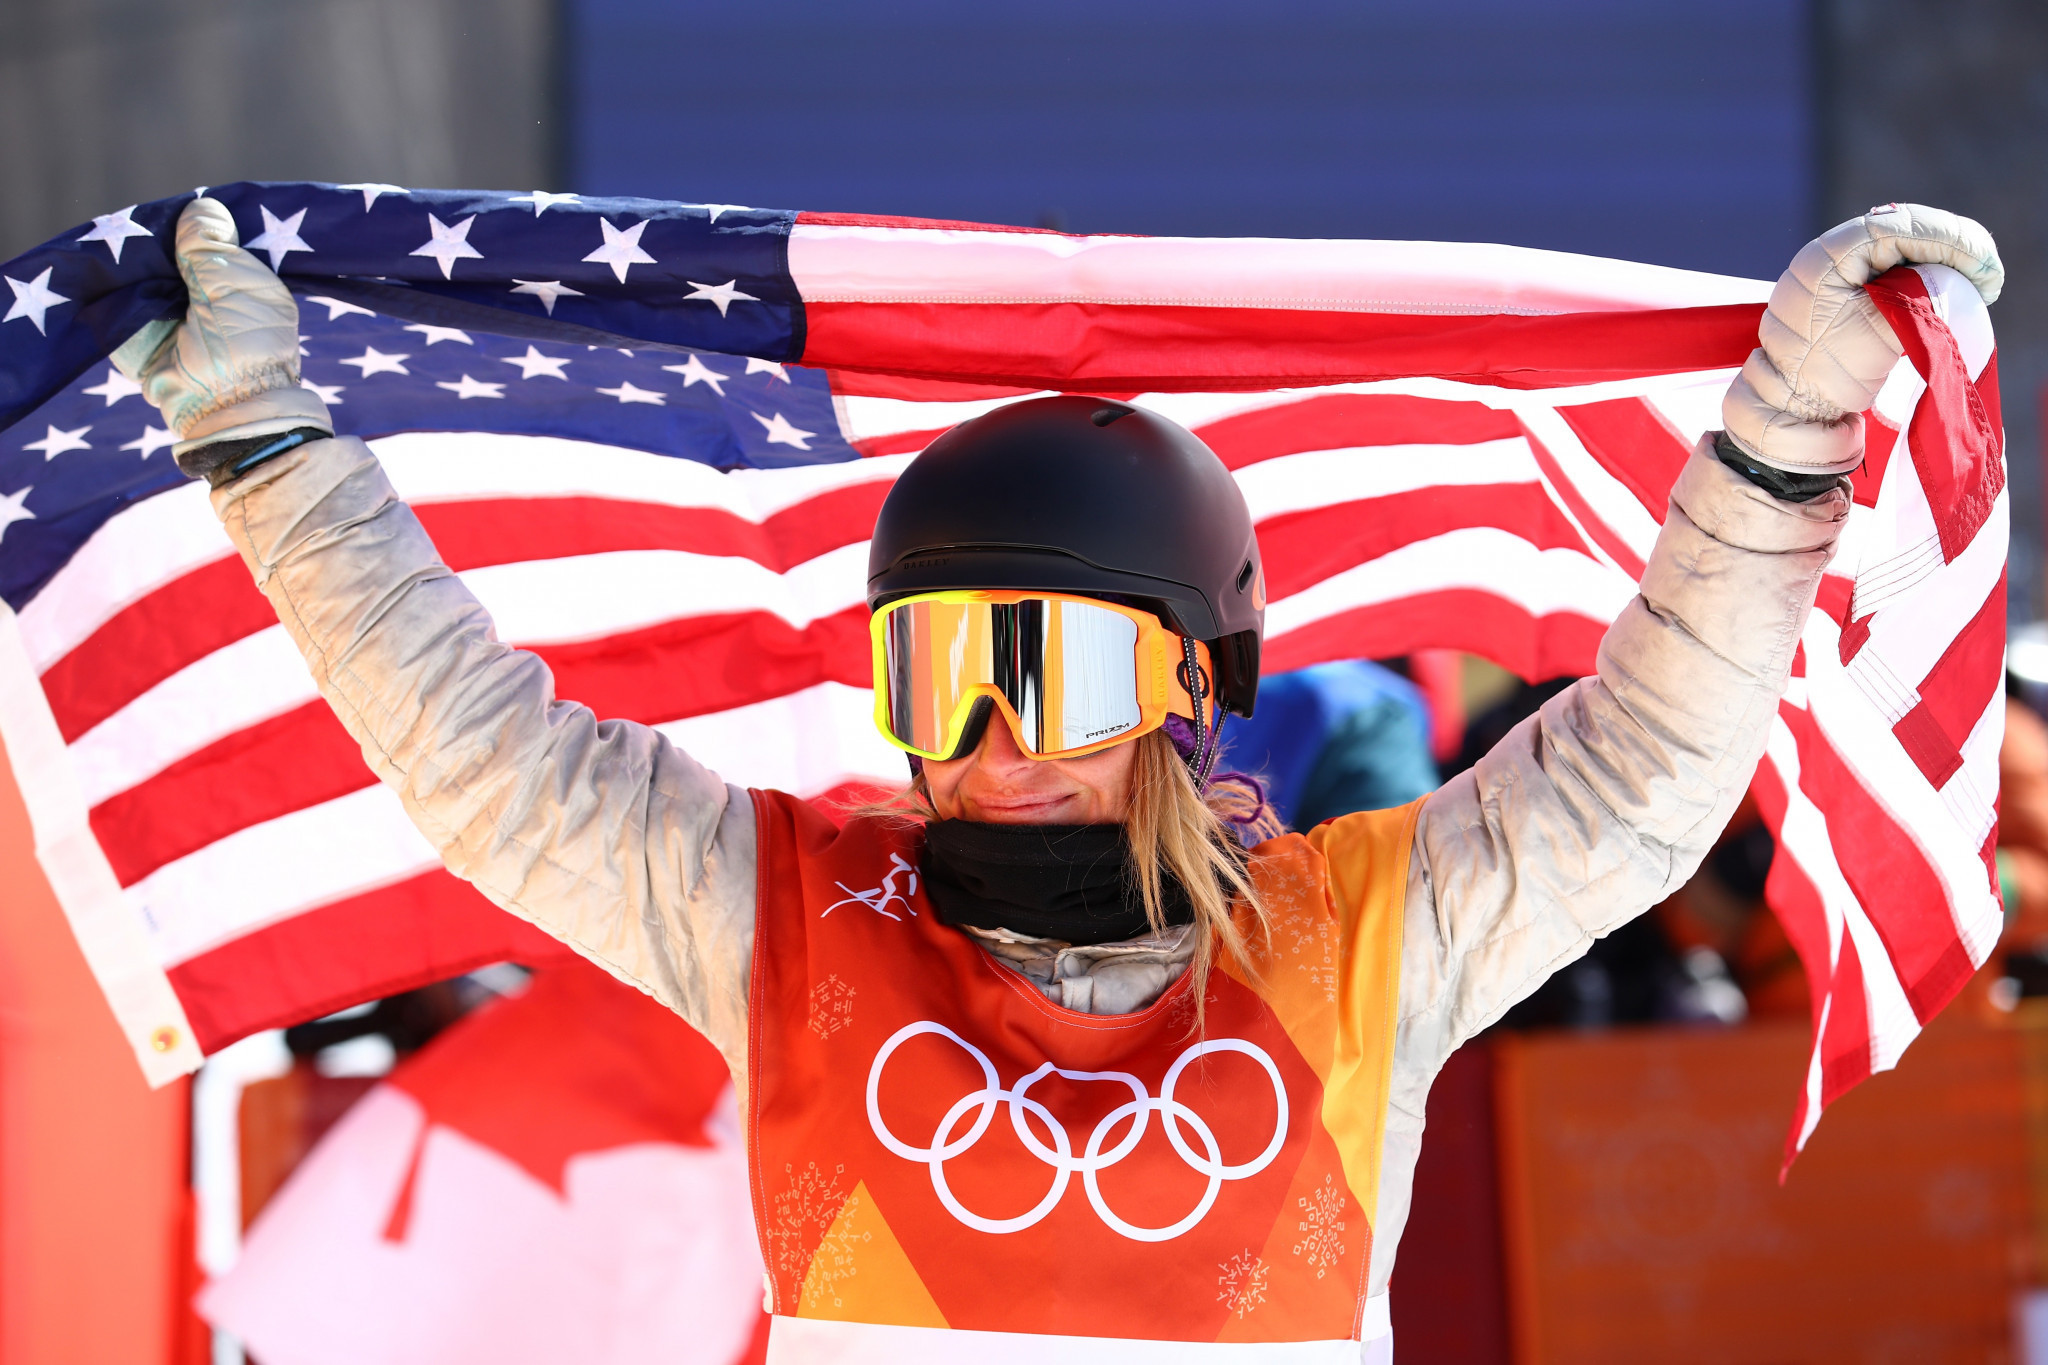 Two-time Olympic slopestyle champion Anderson announces pregnancy and Milan Cortina 2026 still a target